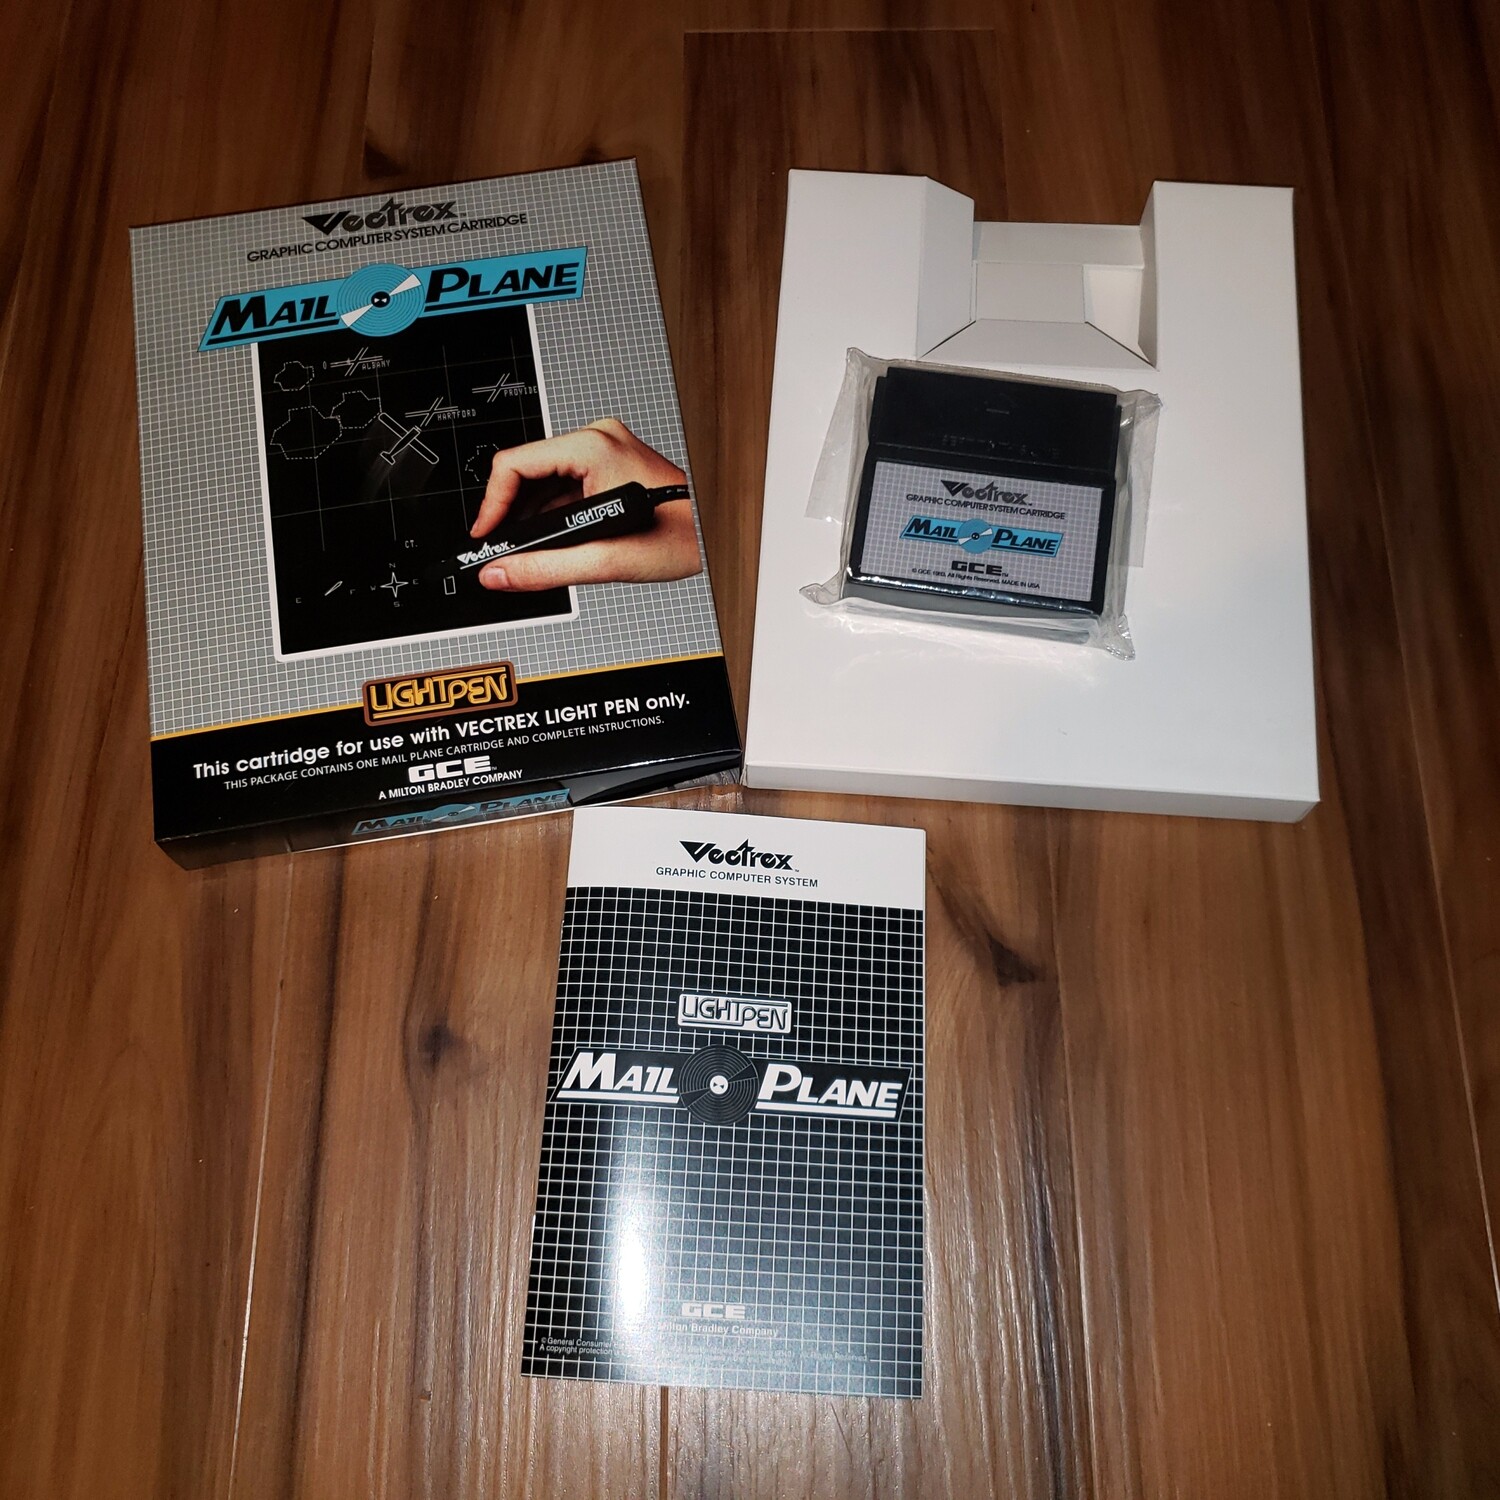 Vectrex Mail Plane, The Standard Edition